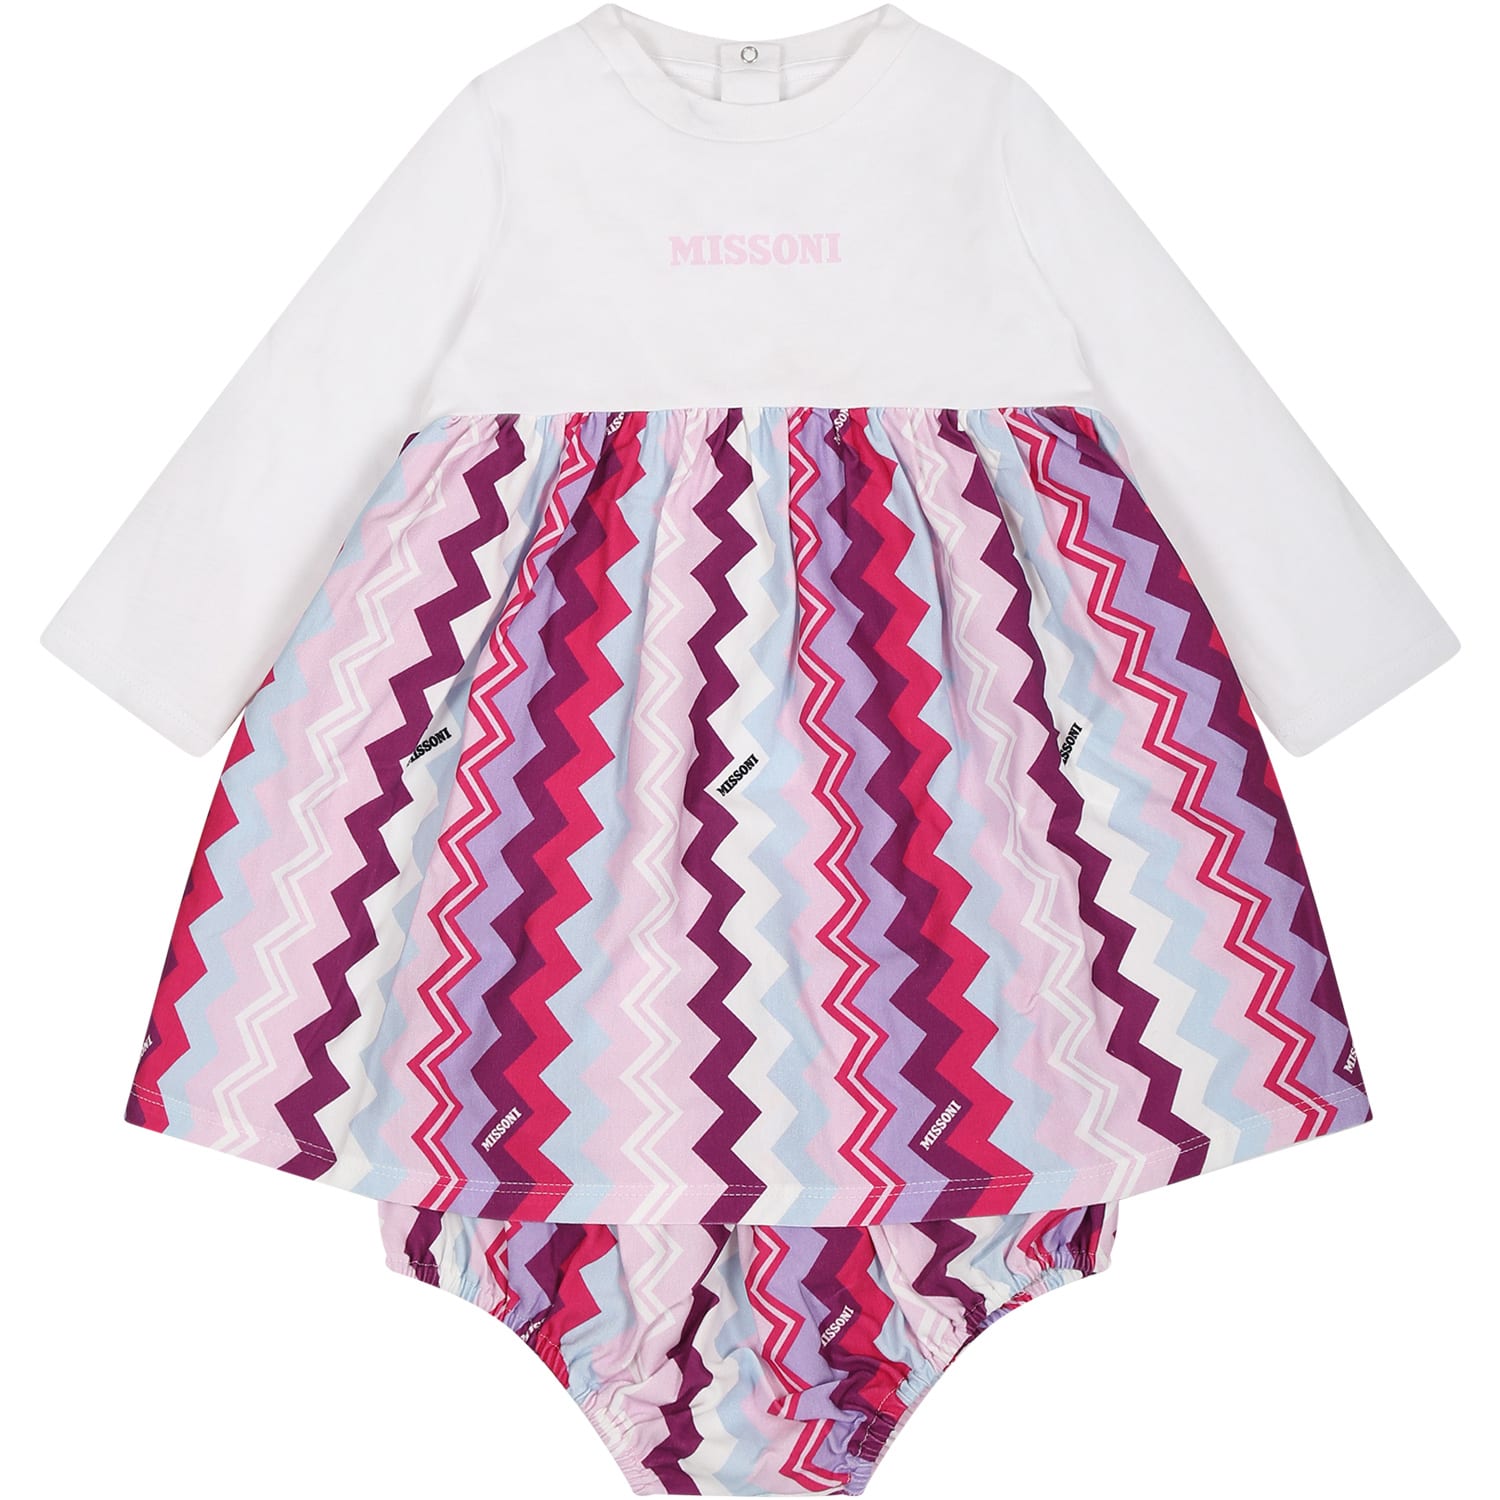 MISSONI MULTICOLOR DRESS FOR BABY GIRL WITH LOGO